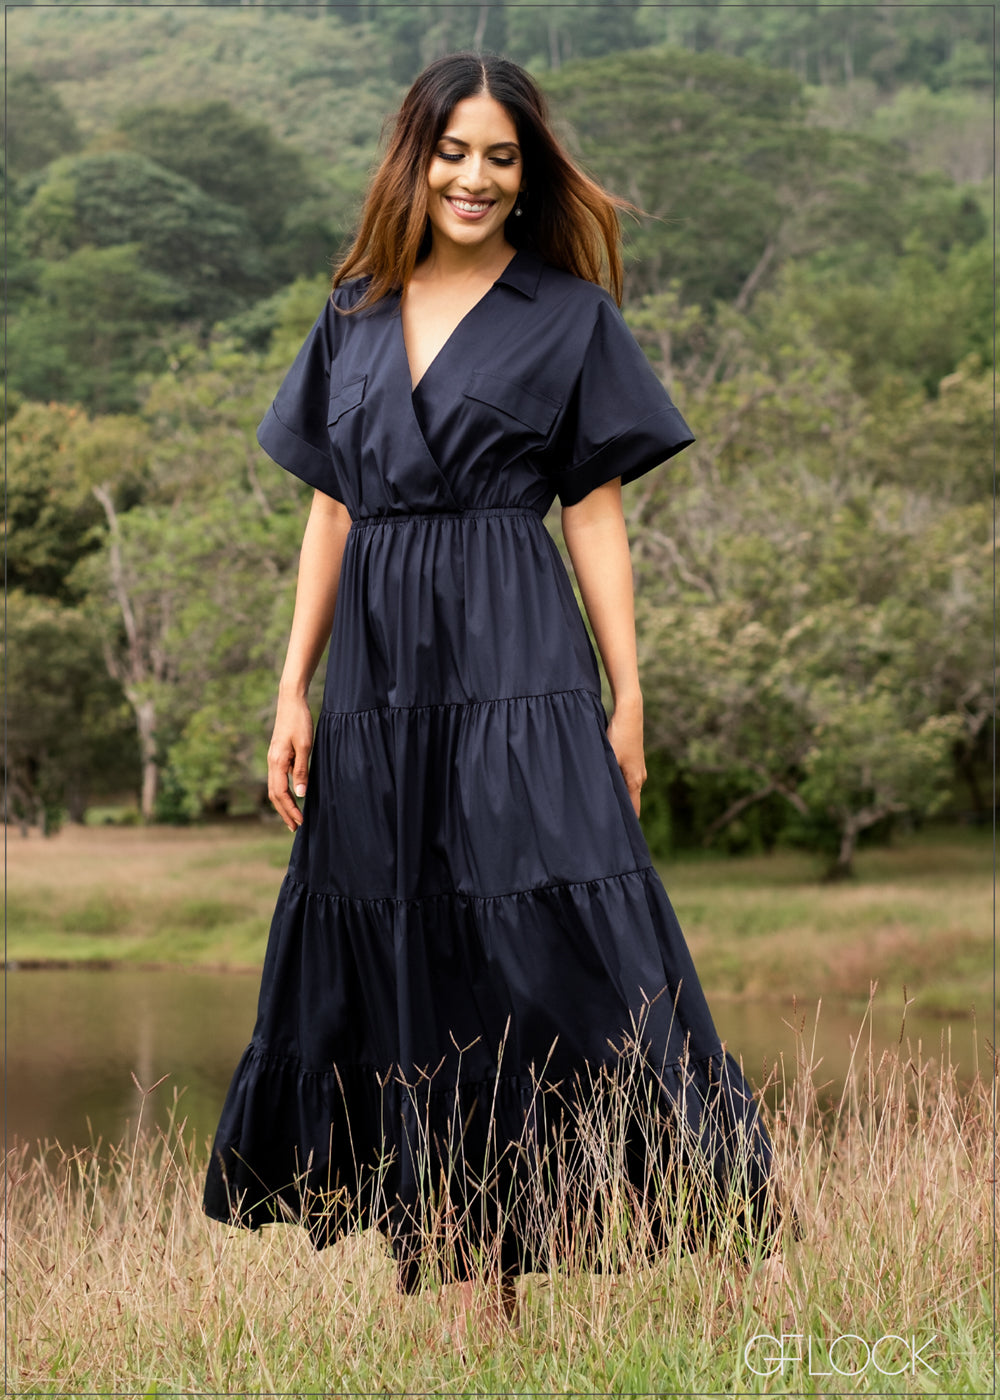 Tiered Collared Maxi Dress - 130323